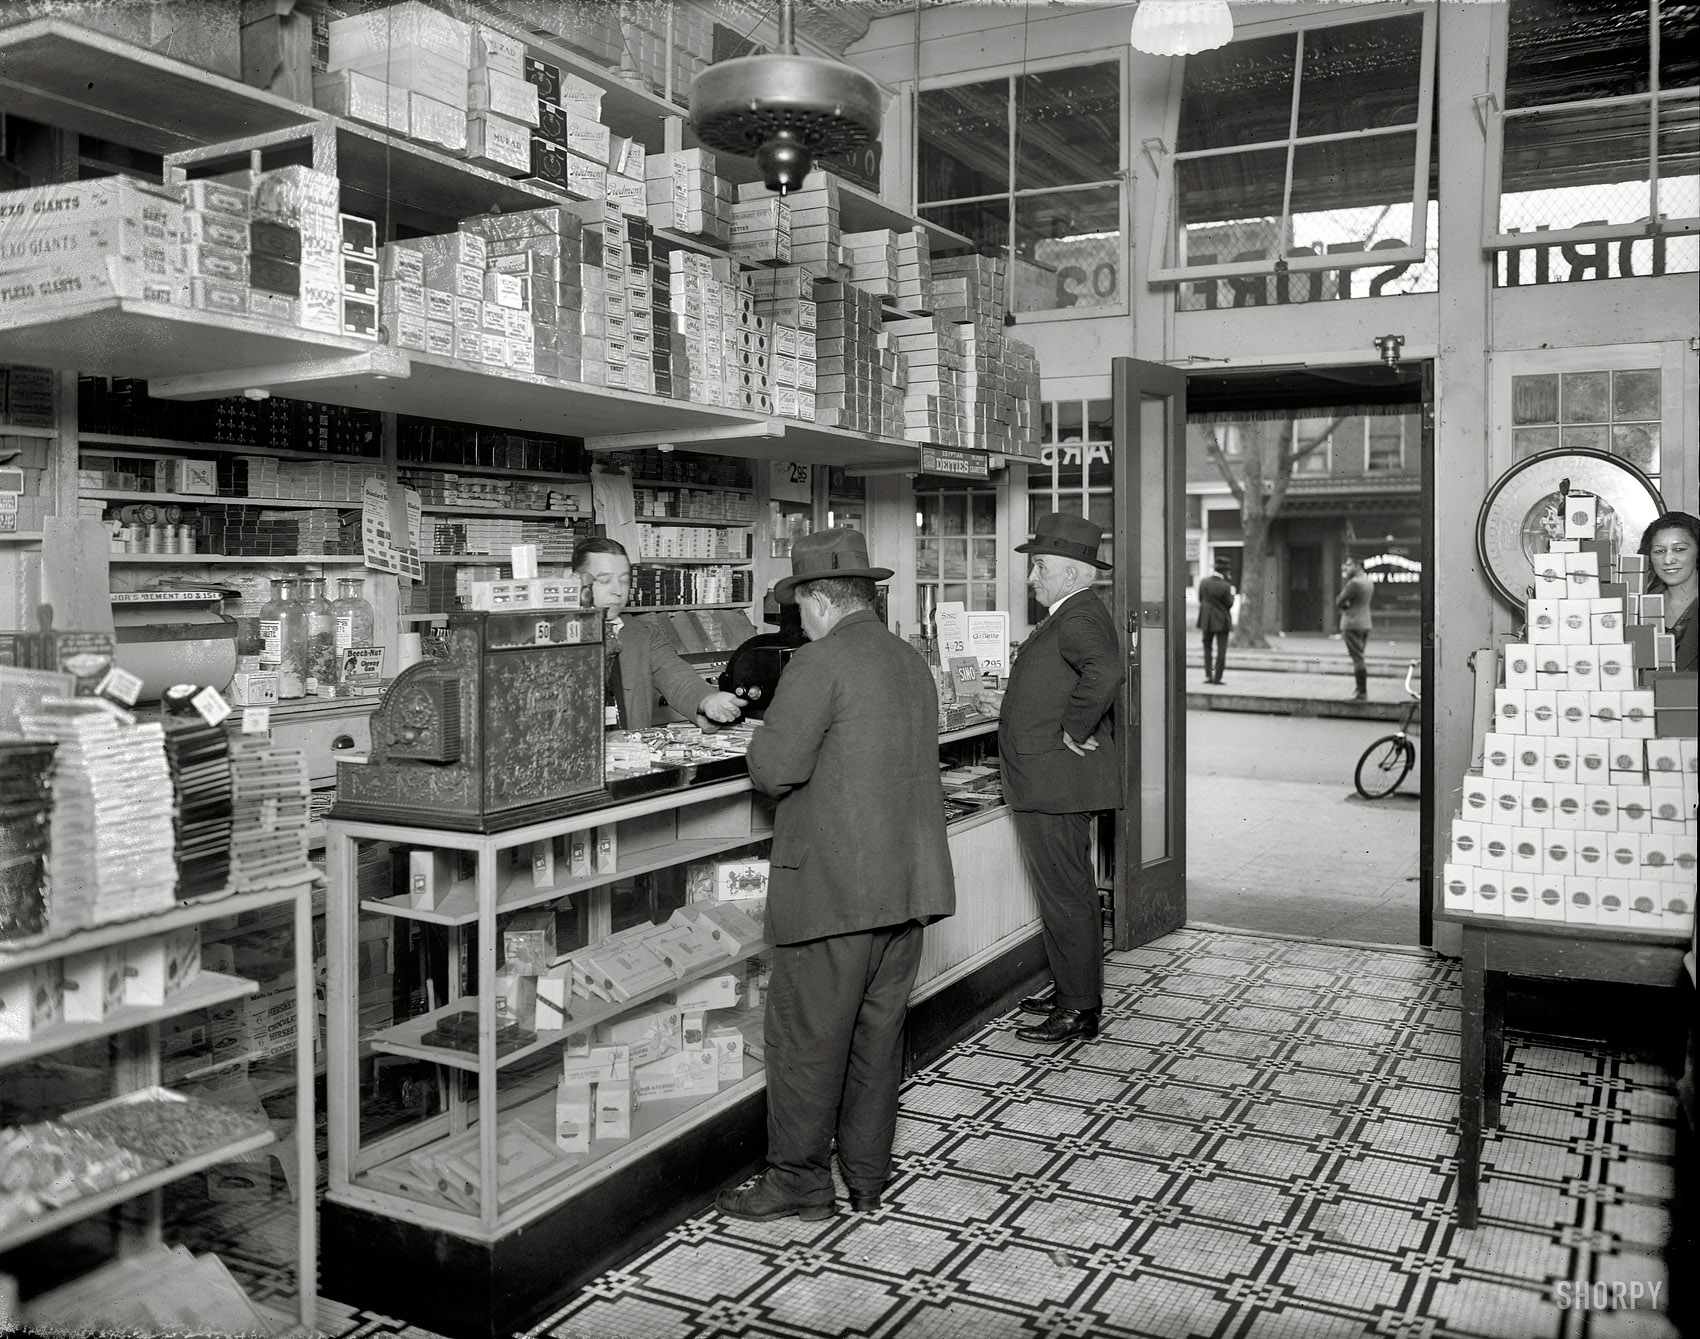 Washington circa 1920. "People's Drug Store, 14th and U." Another view of the drug emporium seen in the previous post.  National Photo Co. View full size.